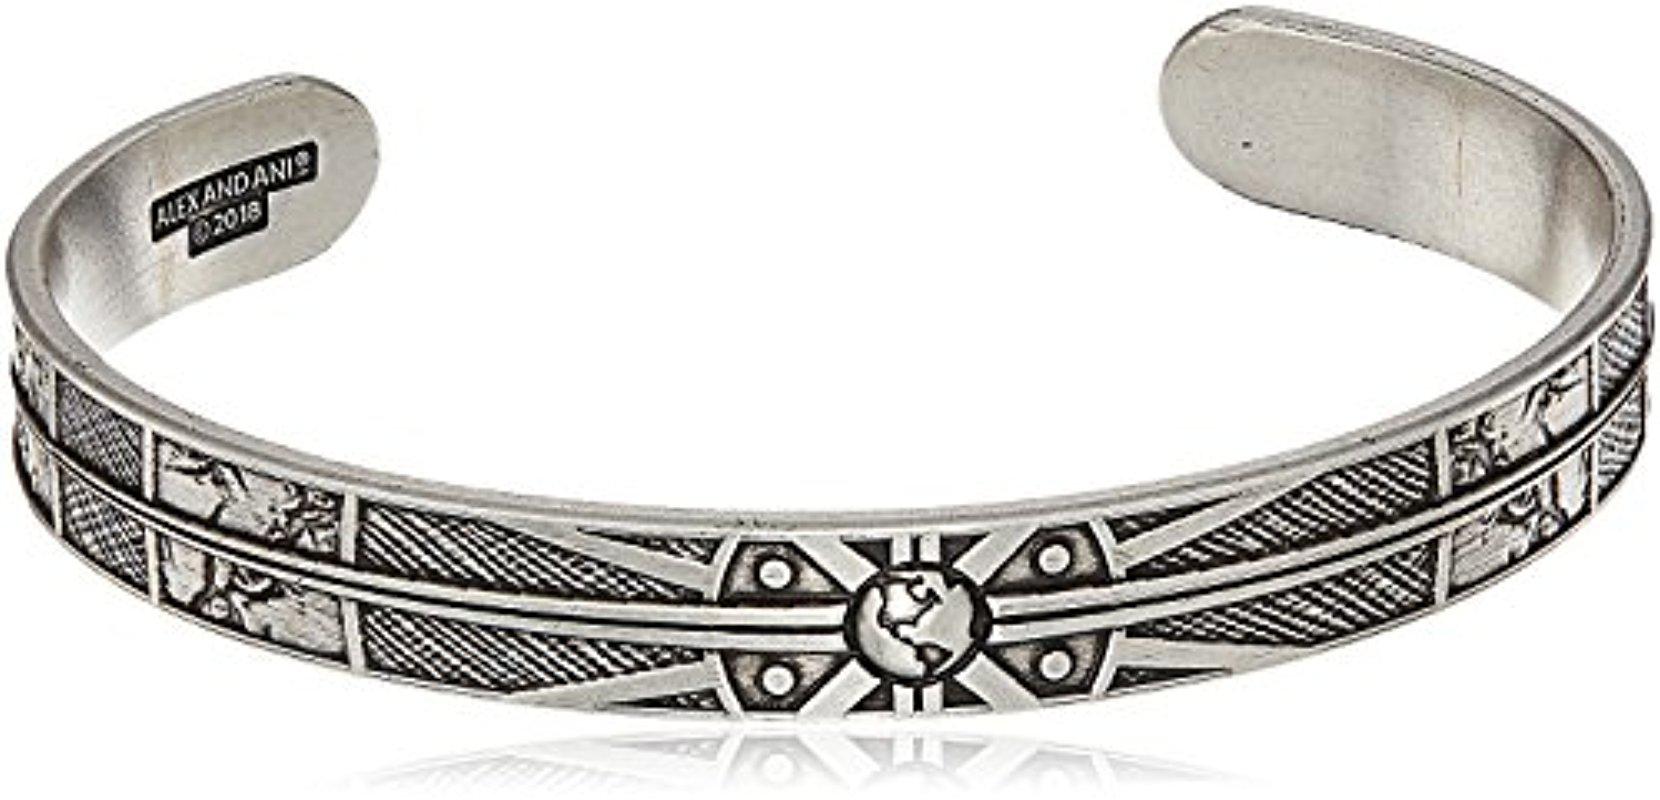 ALEX AND ANI S Compass Cuff Bracelet in Metallic for Men | Lyst